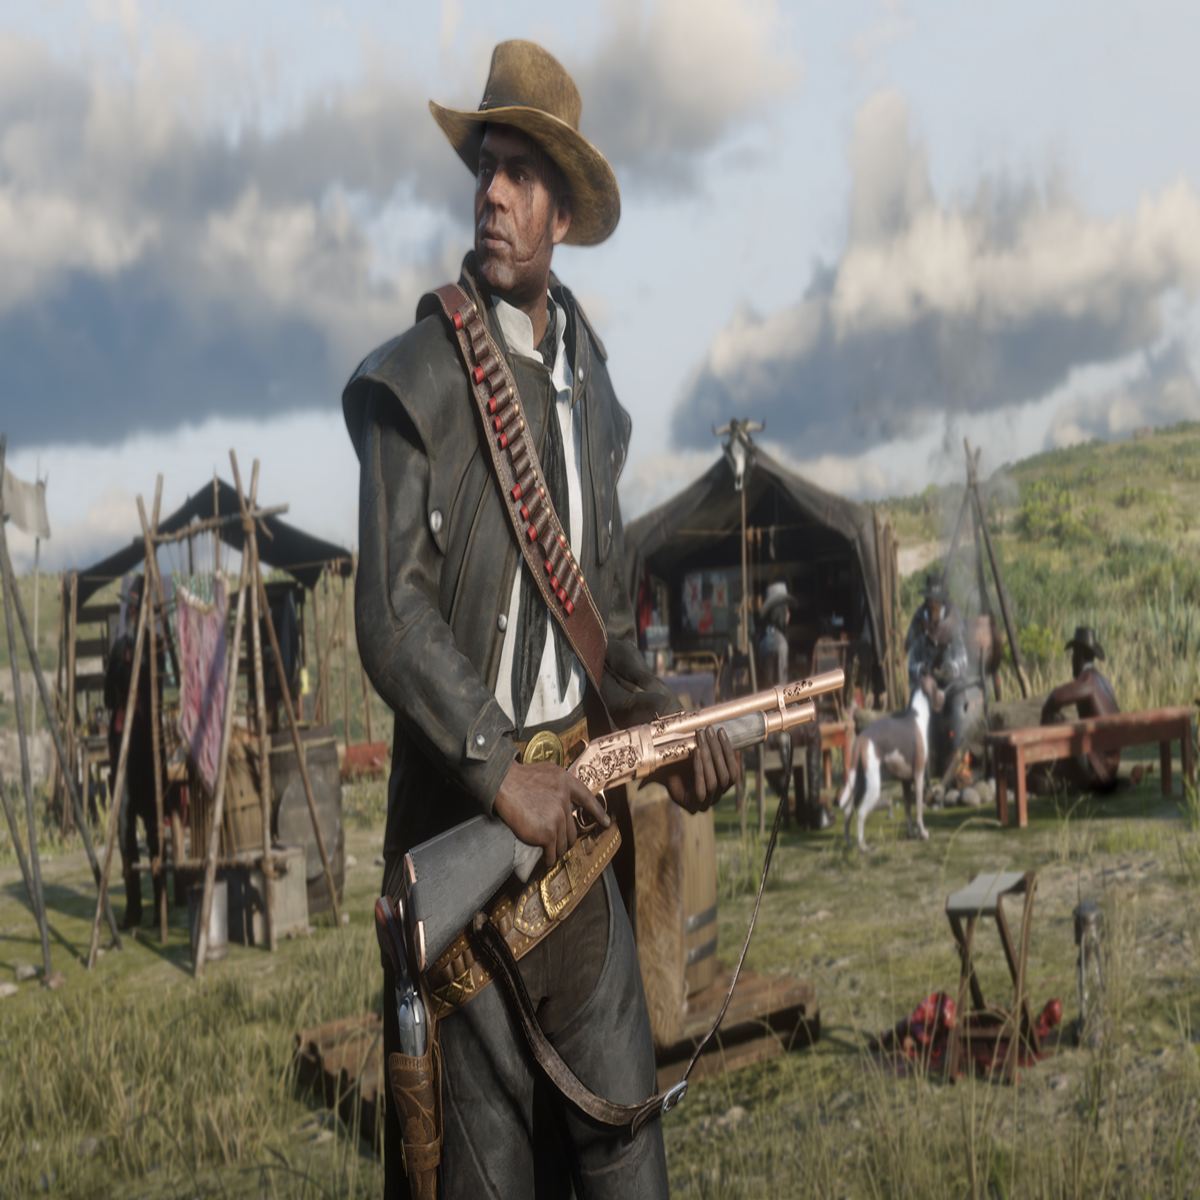 Red Dead 2 on PC: Rockstar Answers Our Pressing Questions